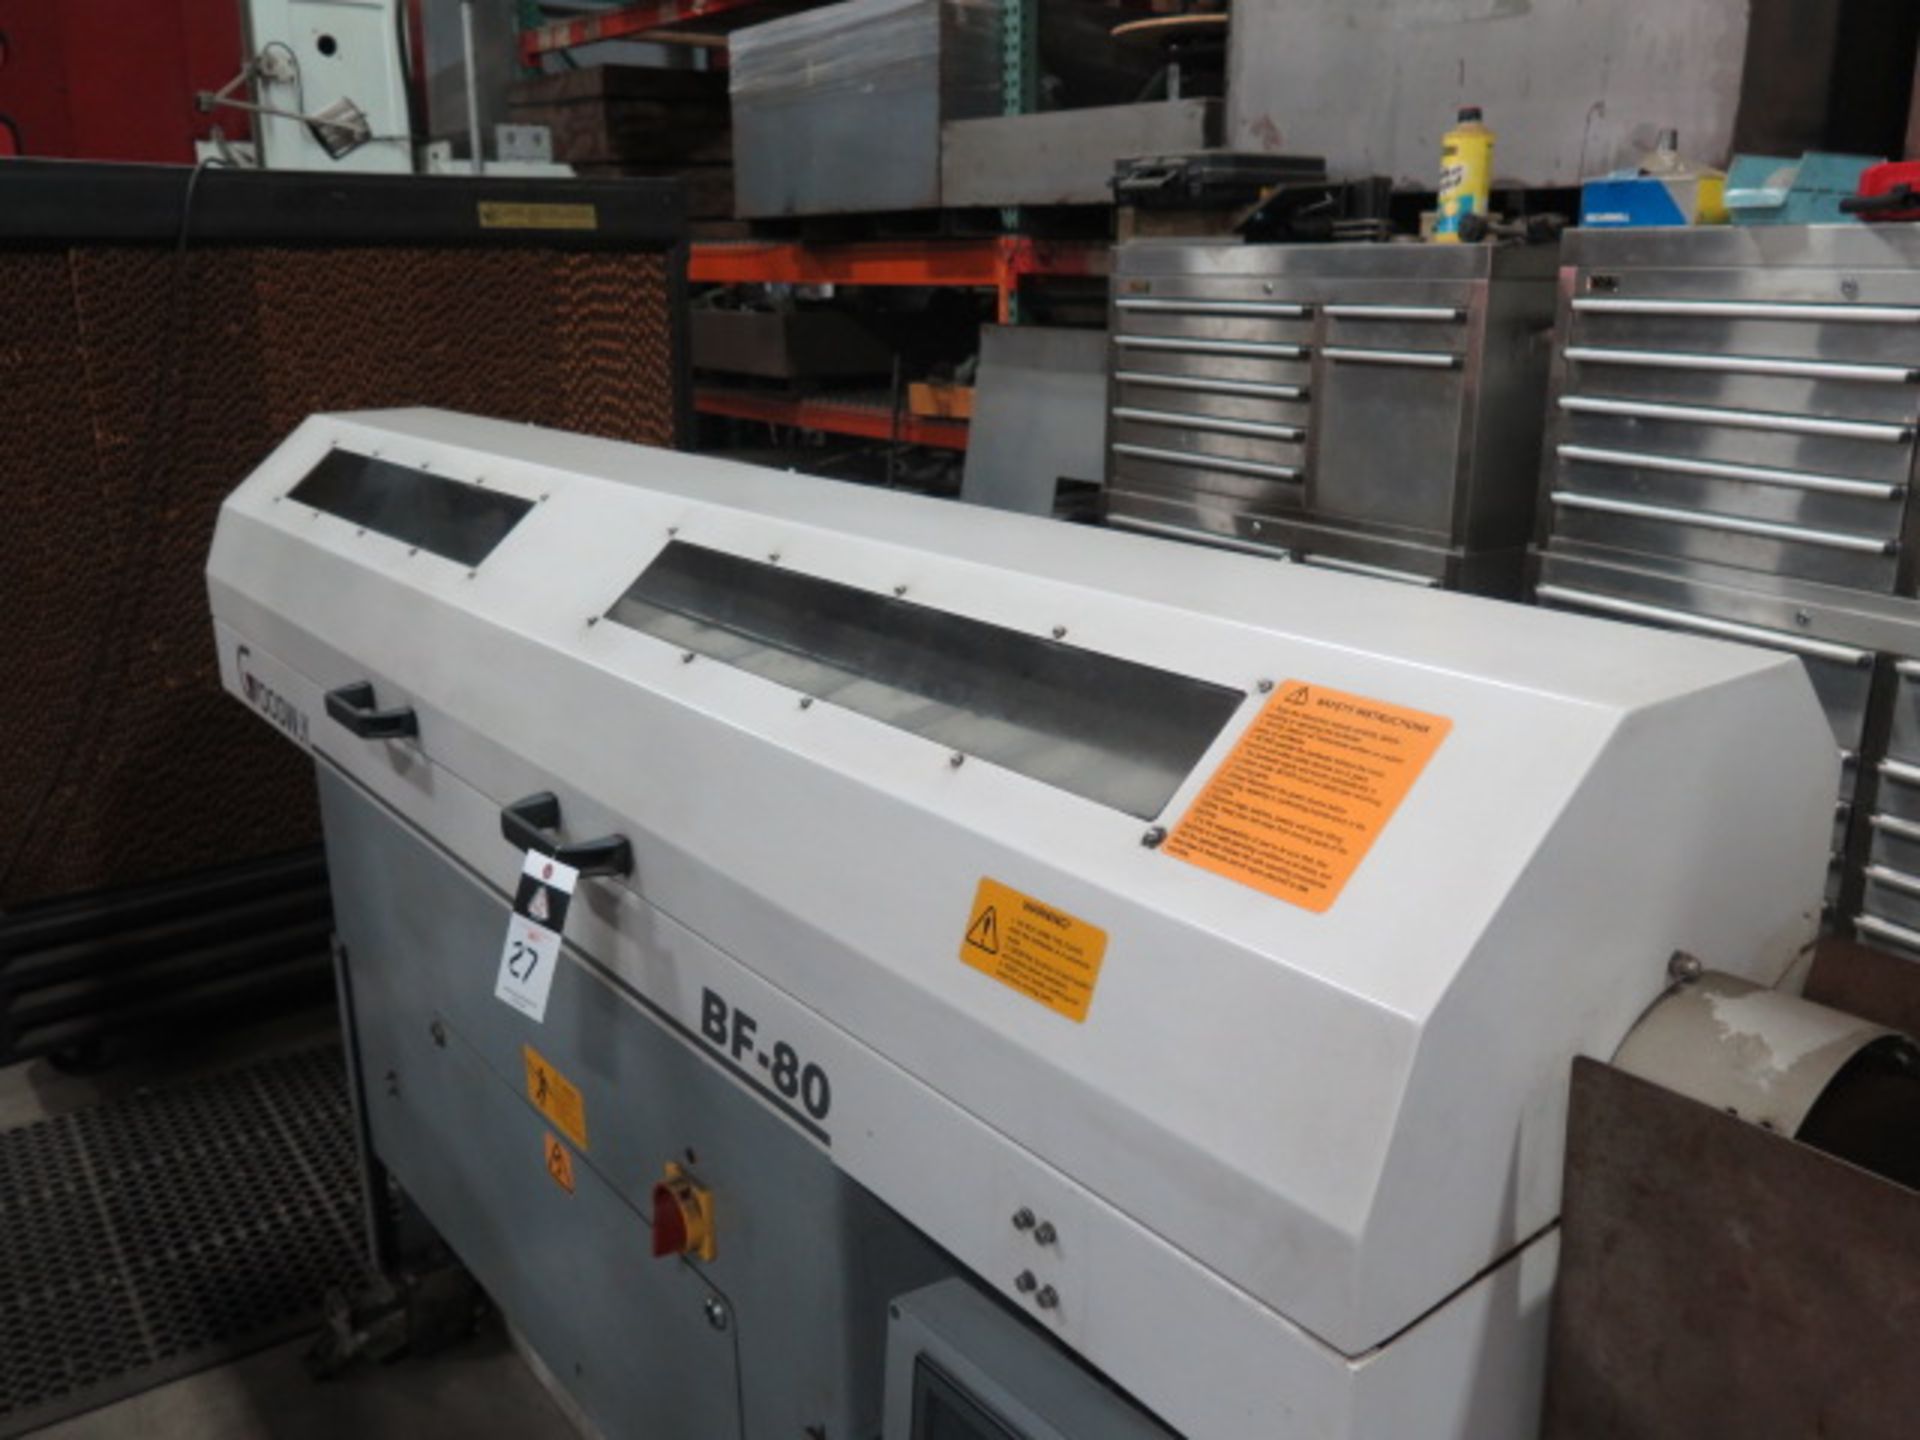 Goodway BF-80 Automatic Bar Loader/Feeder w/ PLC Controls (SOLD AS-IS - NO WARRANTY) - Image 2 of 10